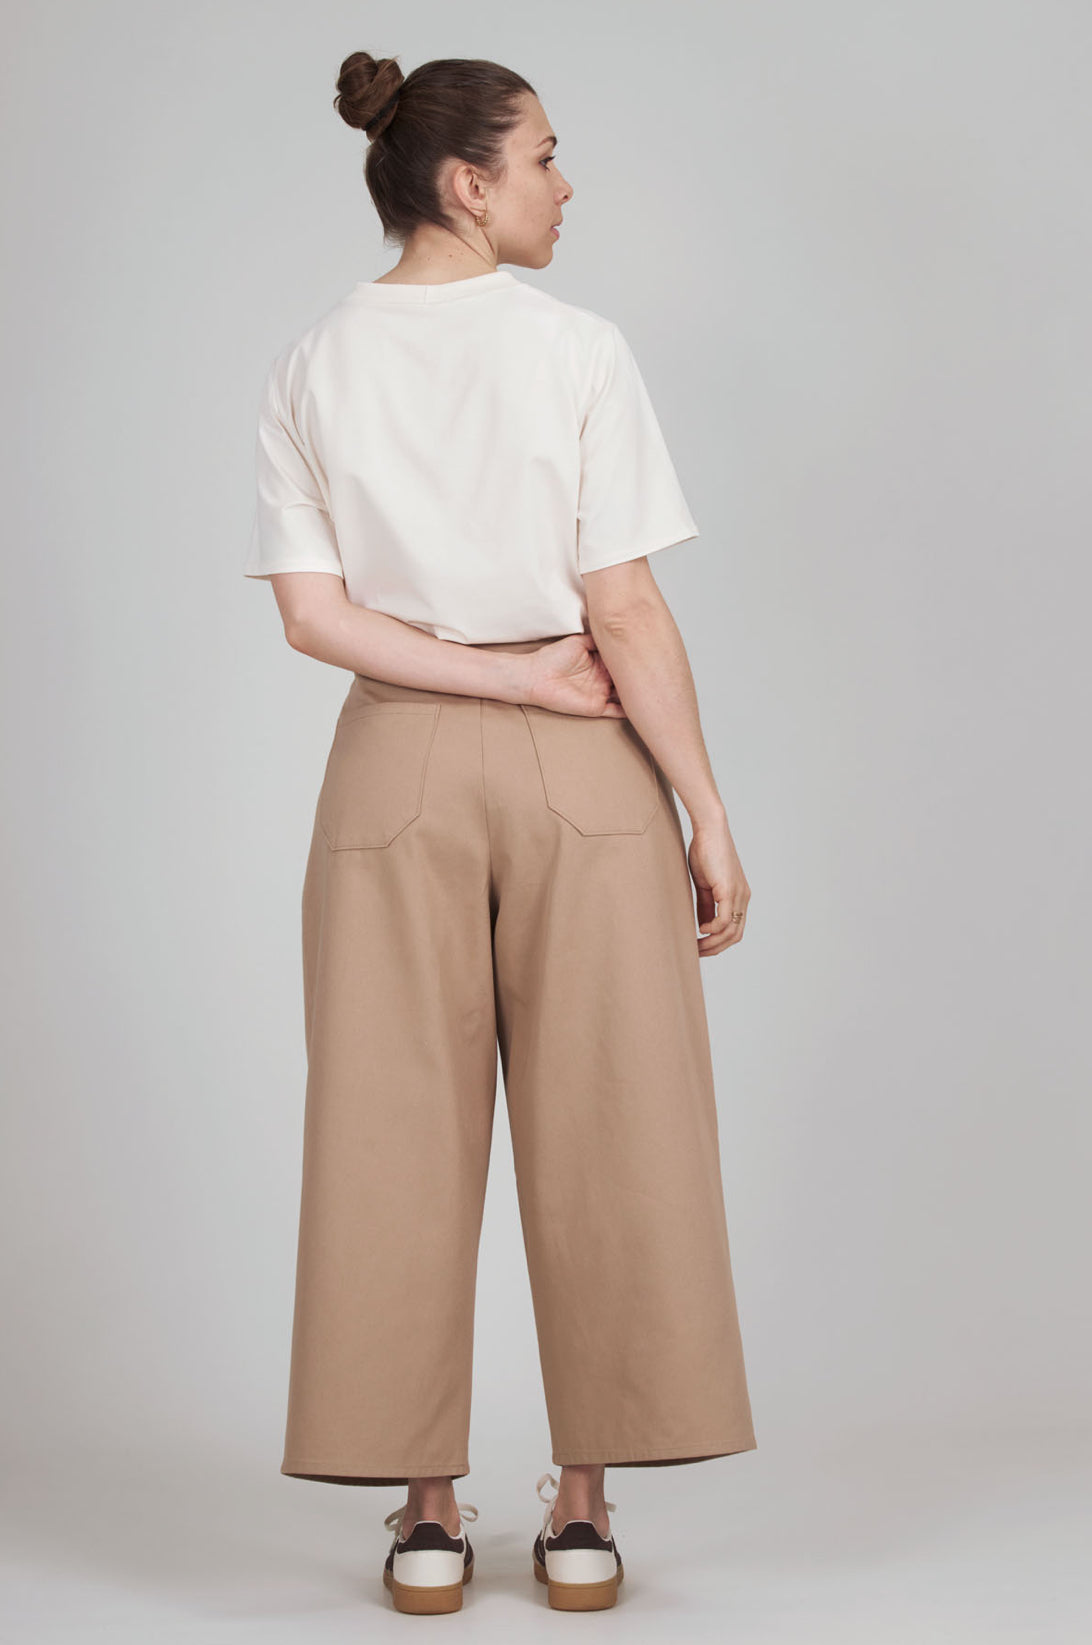 I AM - Harmonie Trousers Sewing Pattern